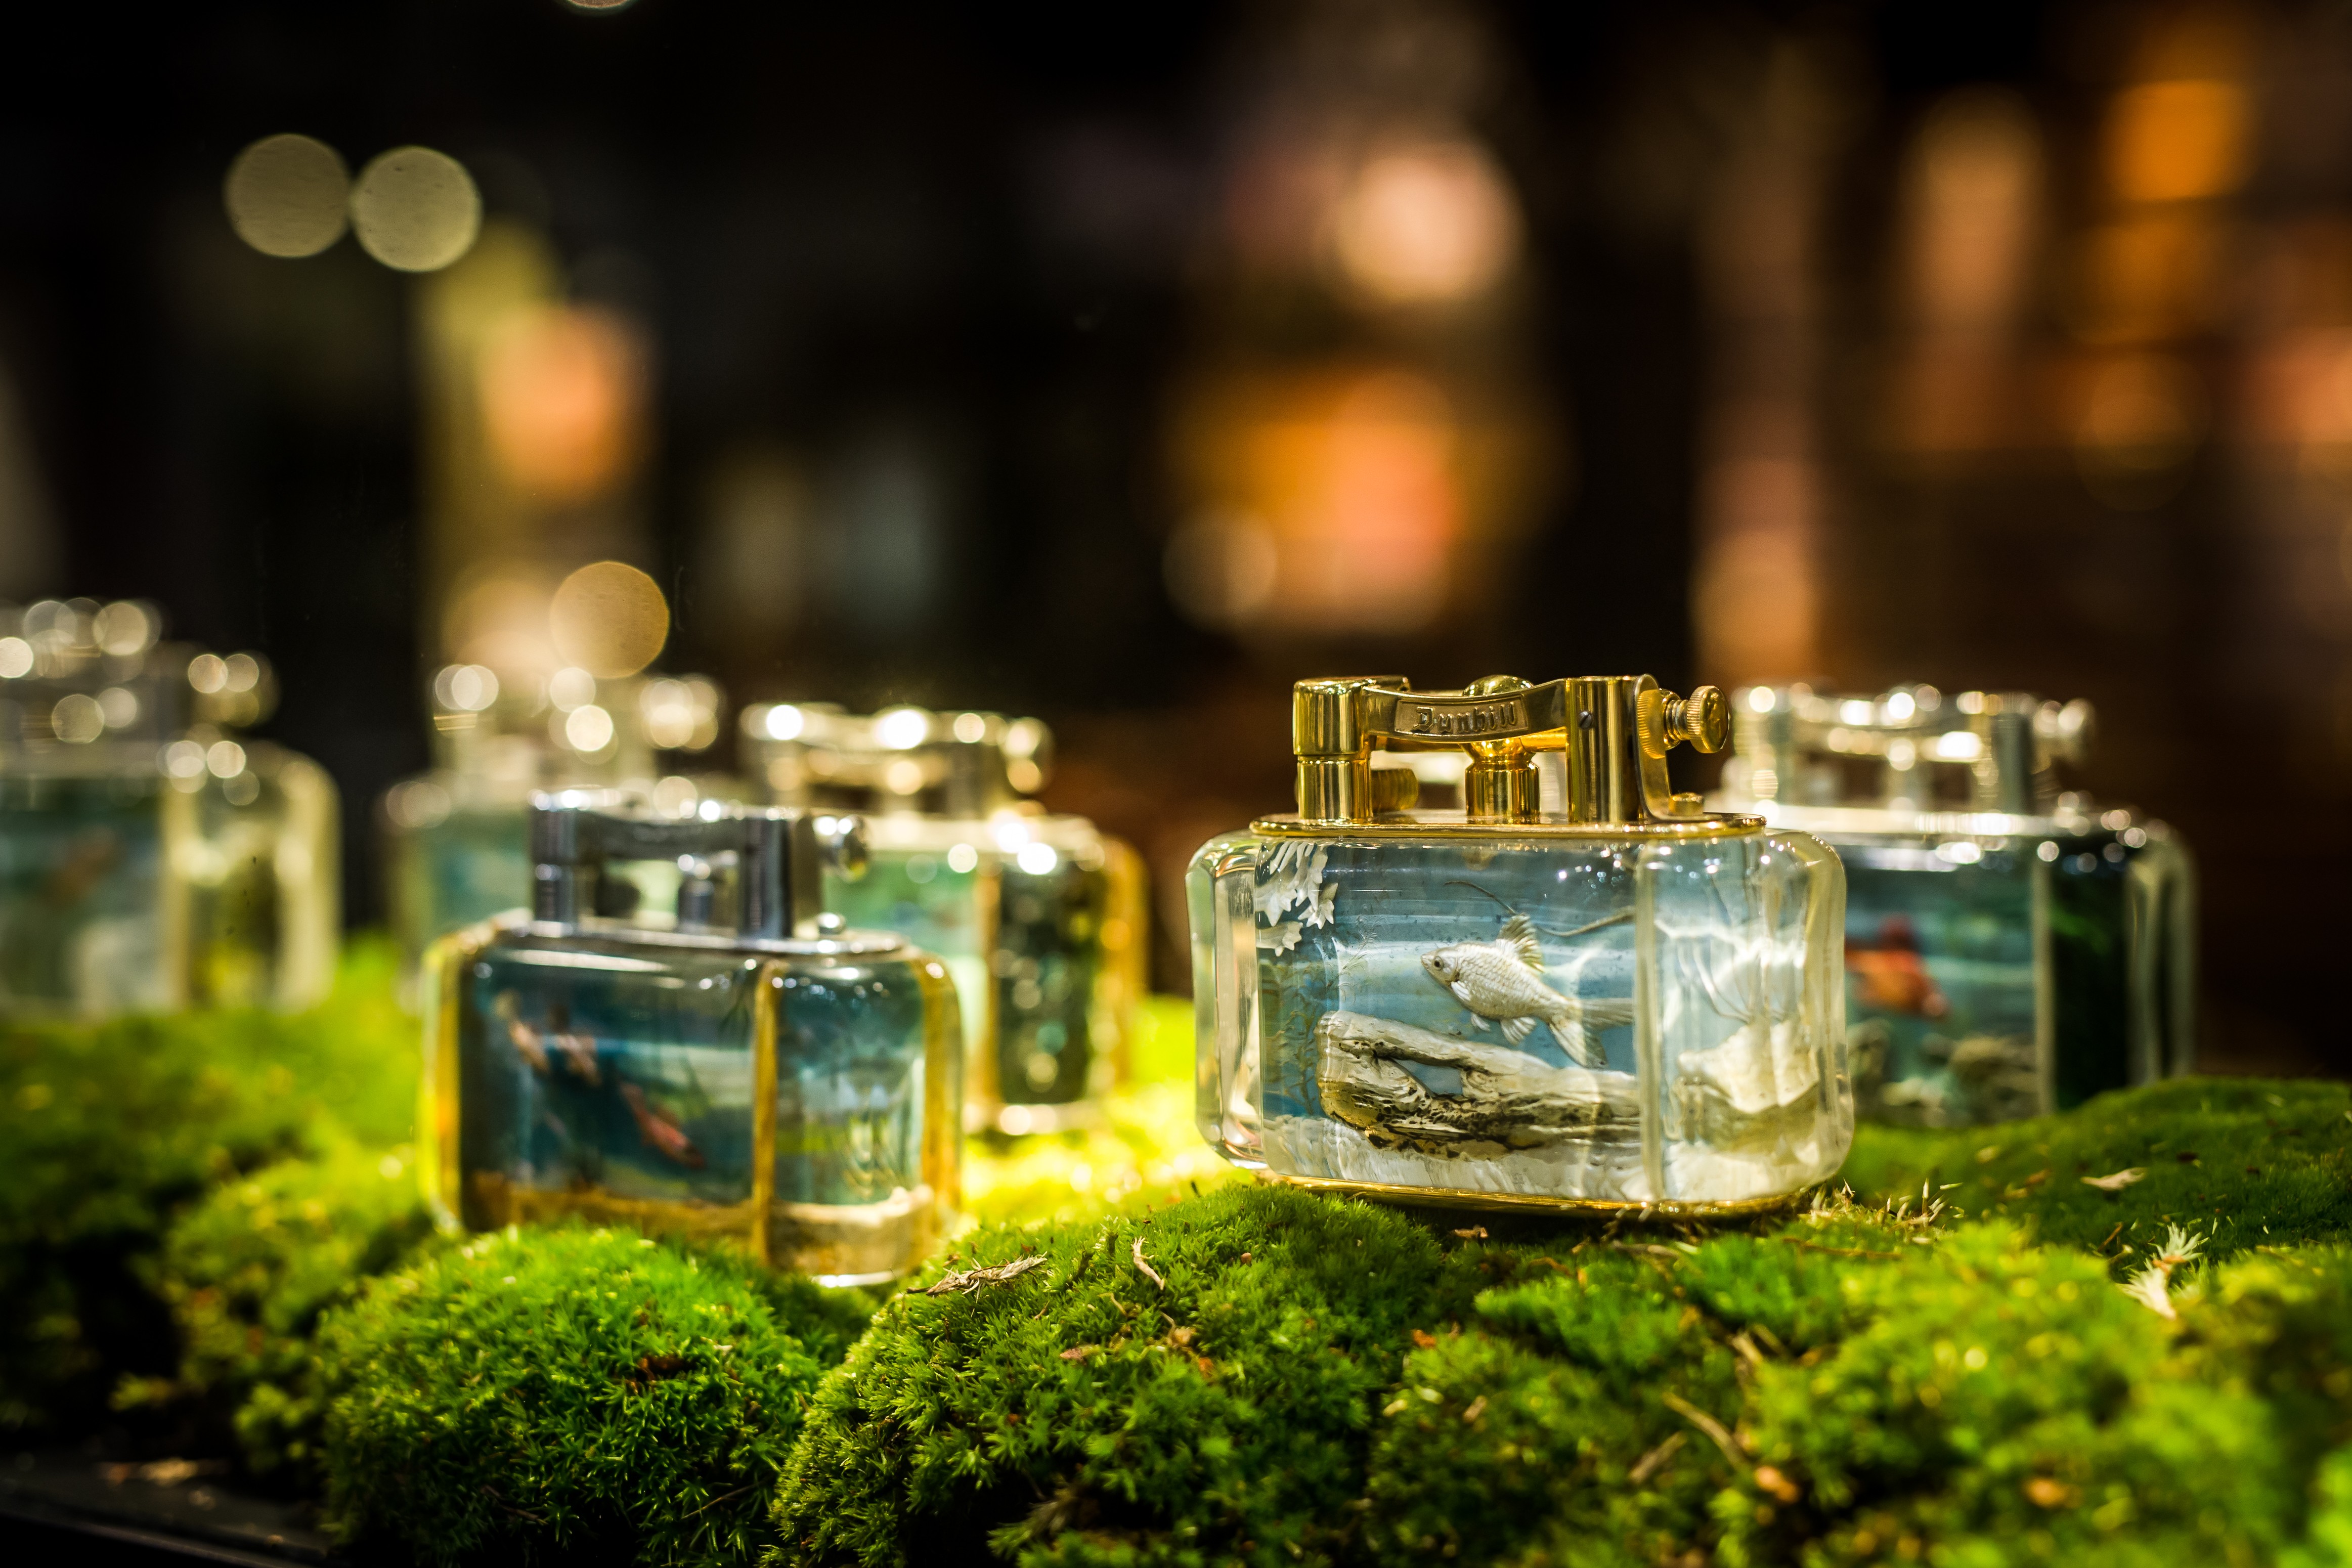 Oulton has spent years buying Dunhill Aquarium lighters in a bid to find out more about creator Ben Shillingford